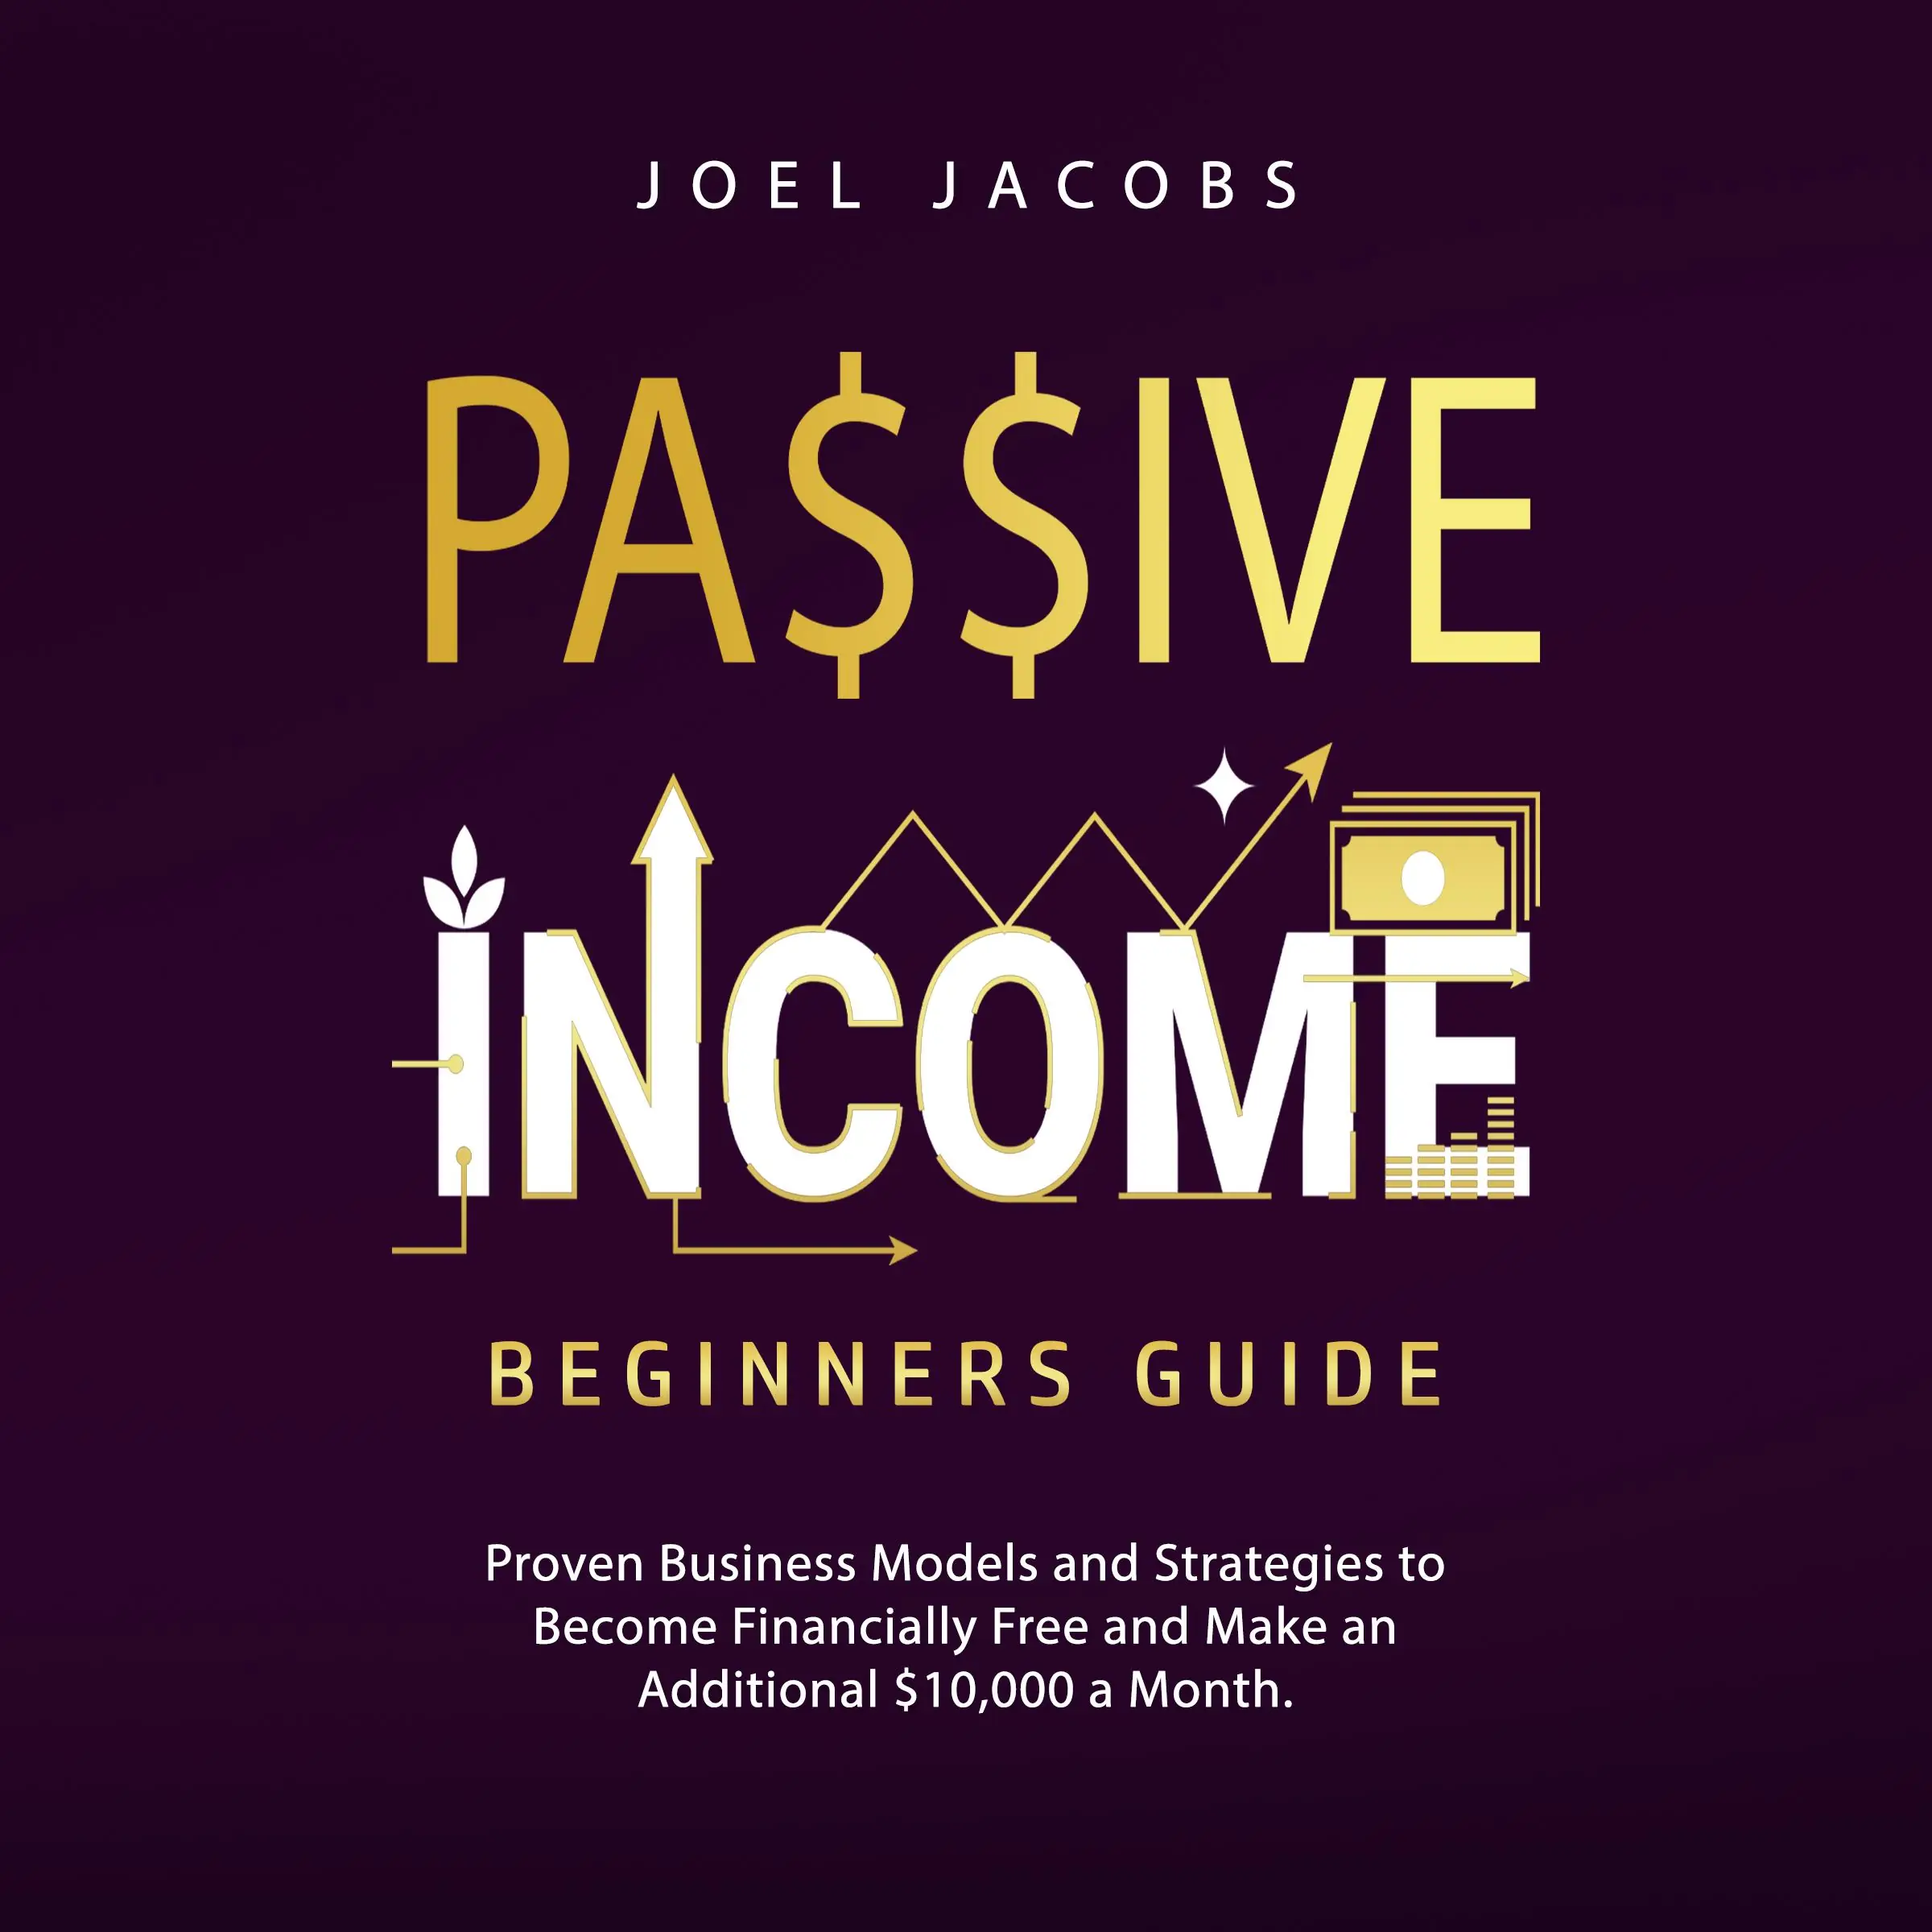 Passive Income – Beginners Guide: Proven Business Models and Strategies to Become Financially Free and Make an Additional $10,000 a Month by Joel Jacobs Audiobook